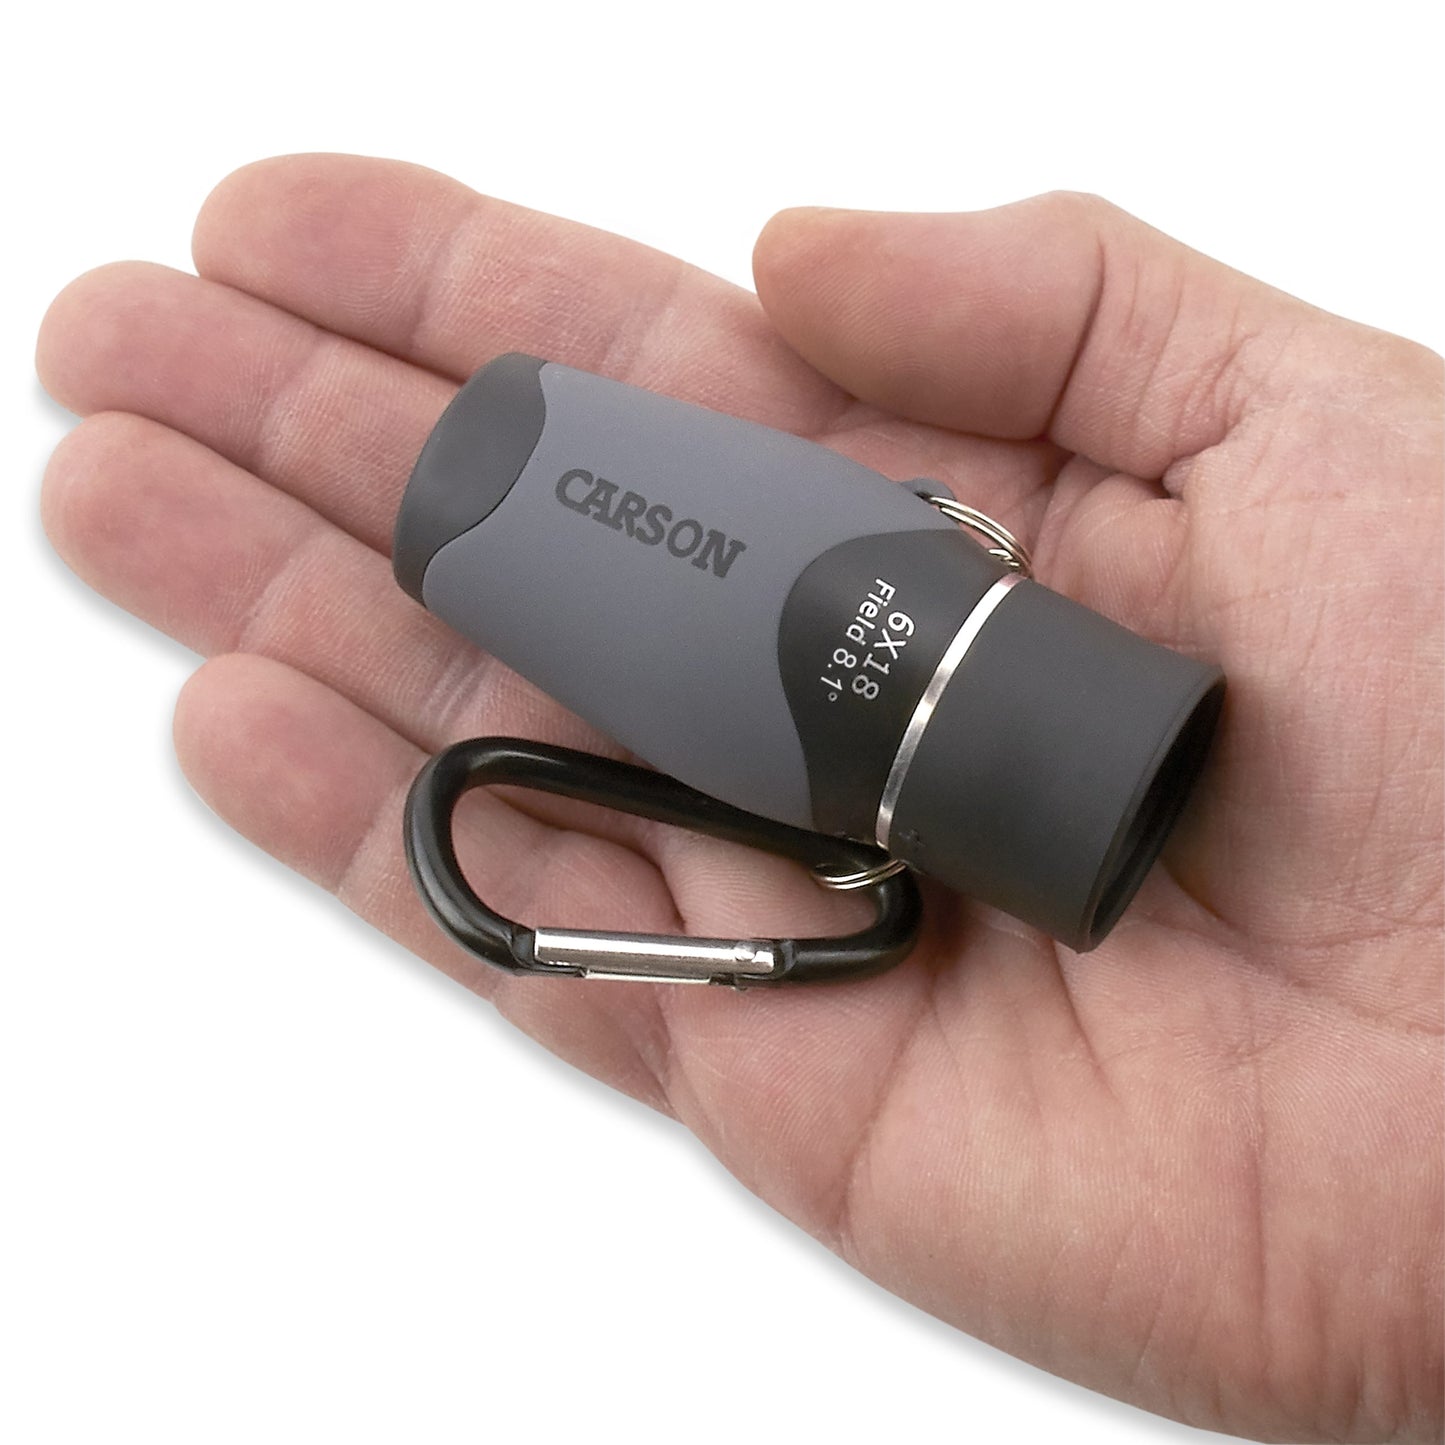 Carson MiniMight 6x18mm Pocket Monocular with Carabiner Clip MM-618